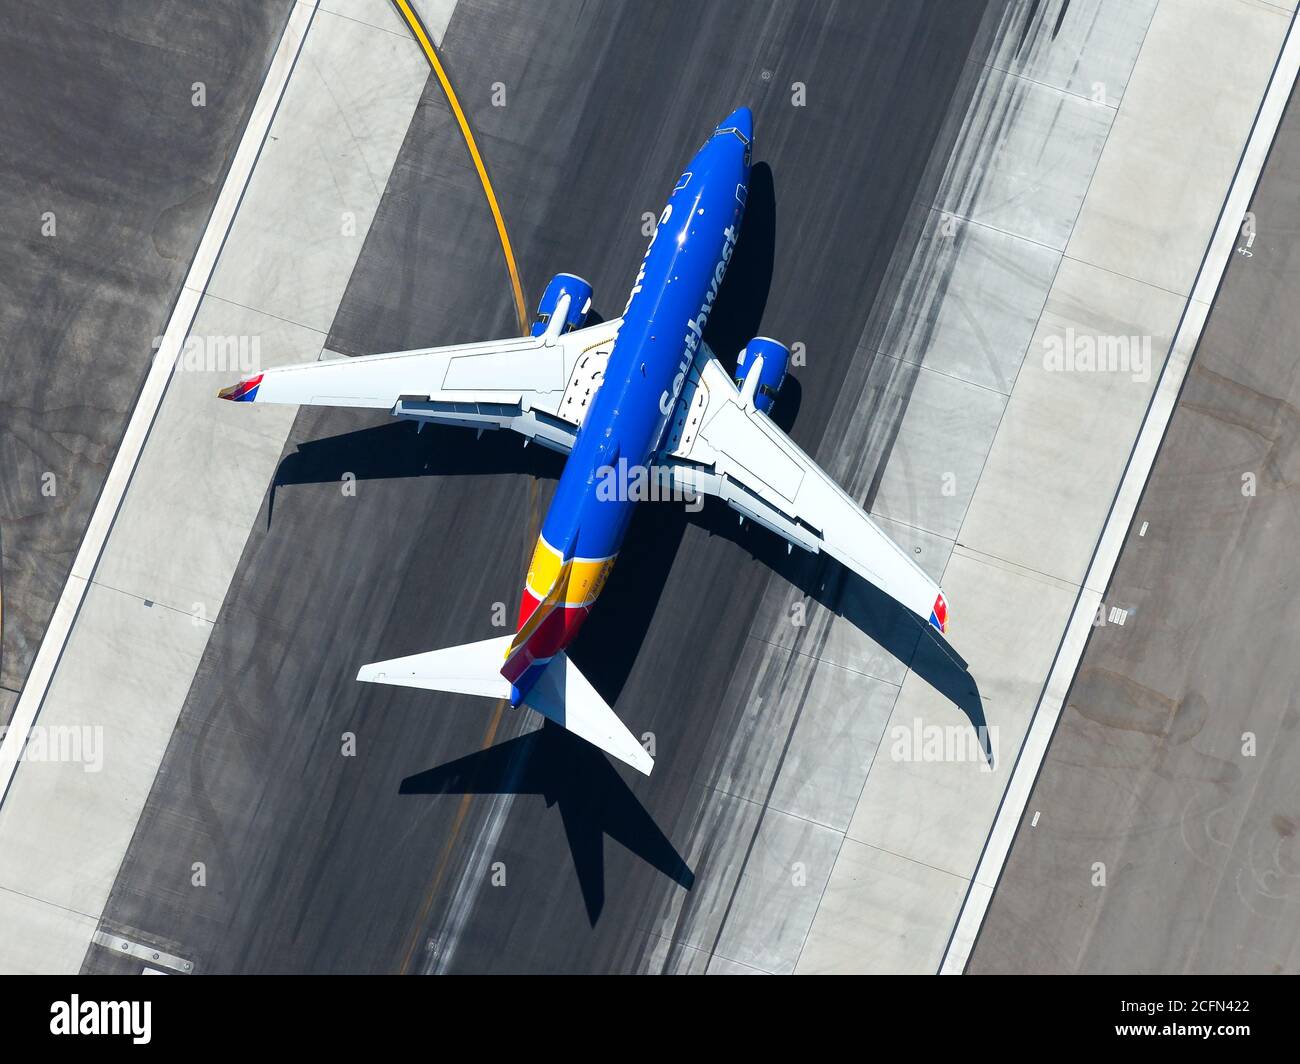 Southwest Airlines Boeing 737 arriving at Los Angeles Airport. Aerial view of airplnae over runway after landing. Wing flaps and slats visible. Stock Photo